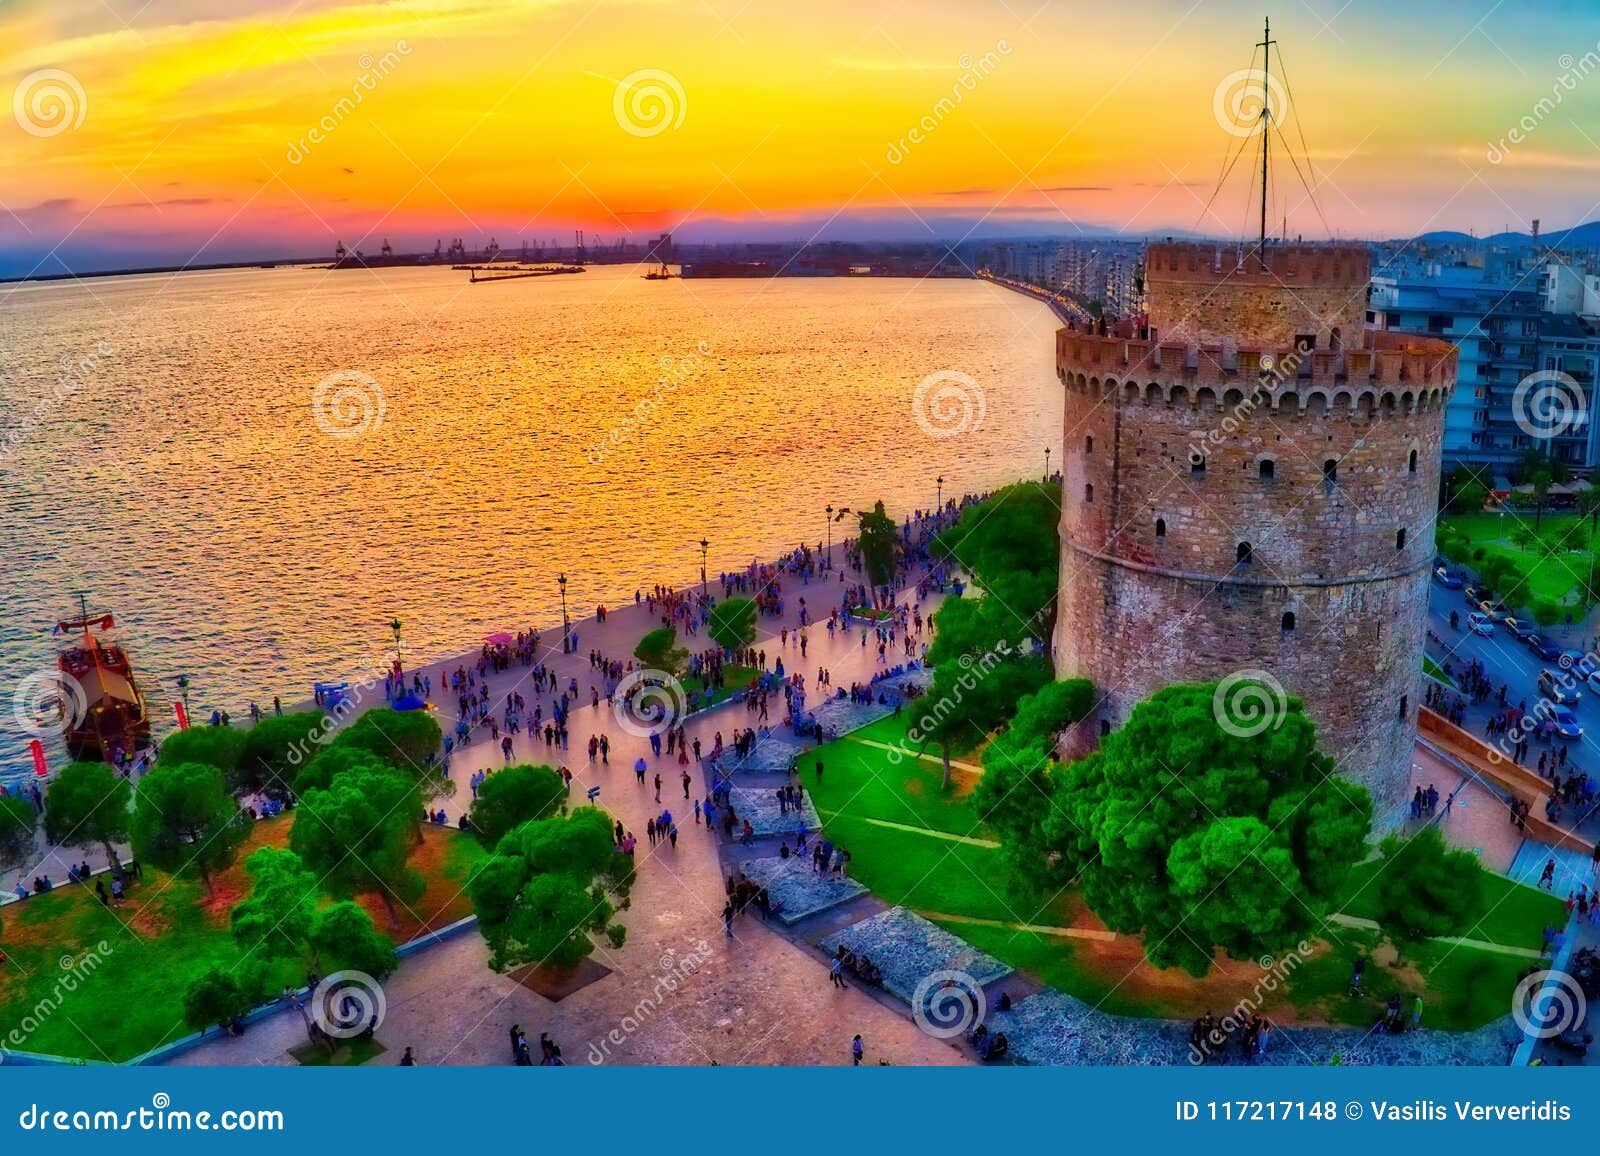 aerial view of famous white tower of thessaloniki at sunset, greece.